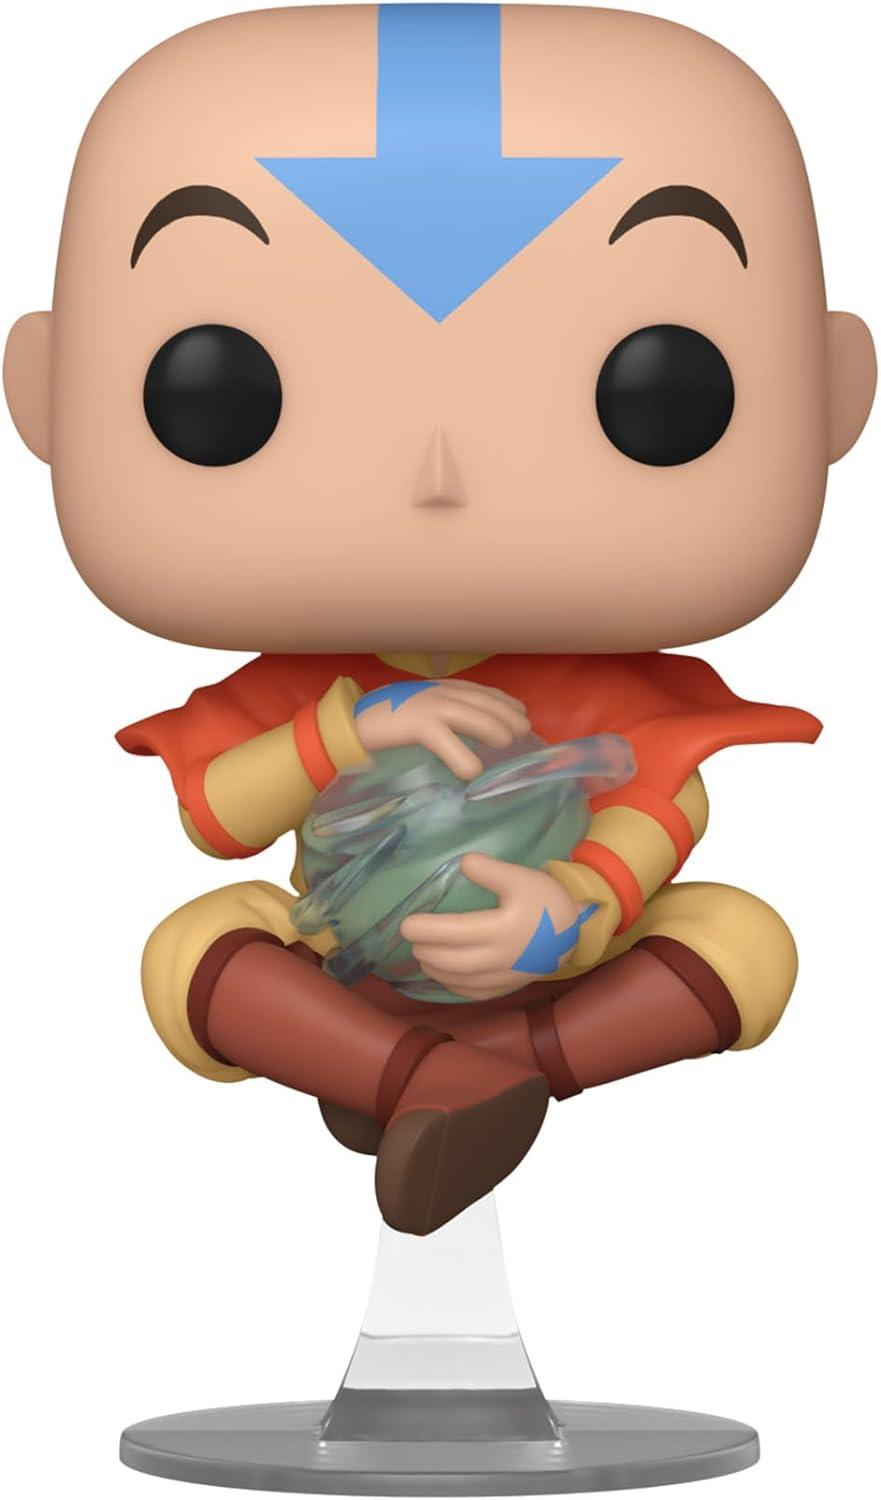 Avatar The Last Airbender: Funko Pop! Animation - floating Aang #1439 - Magic Dreams Store